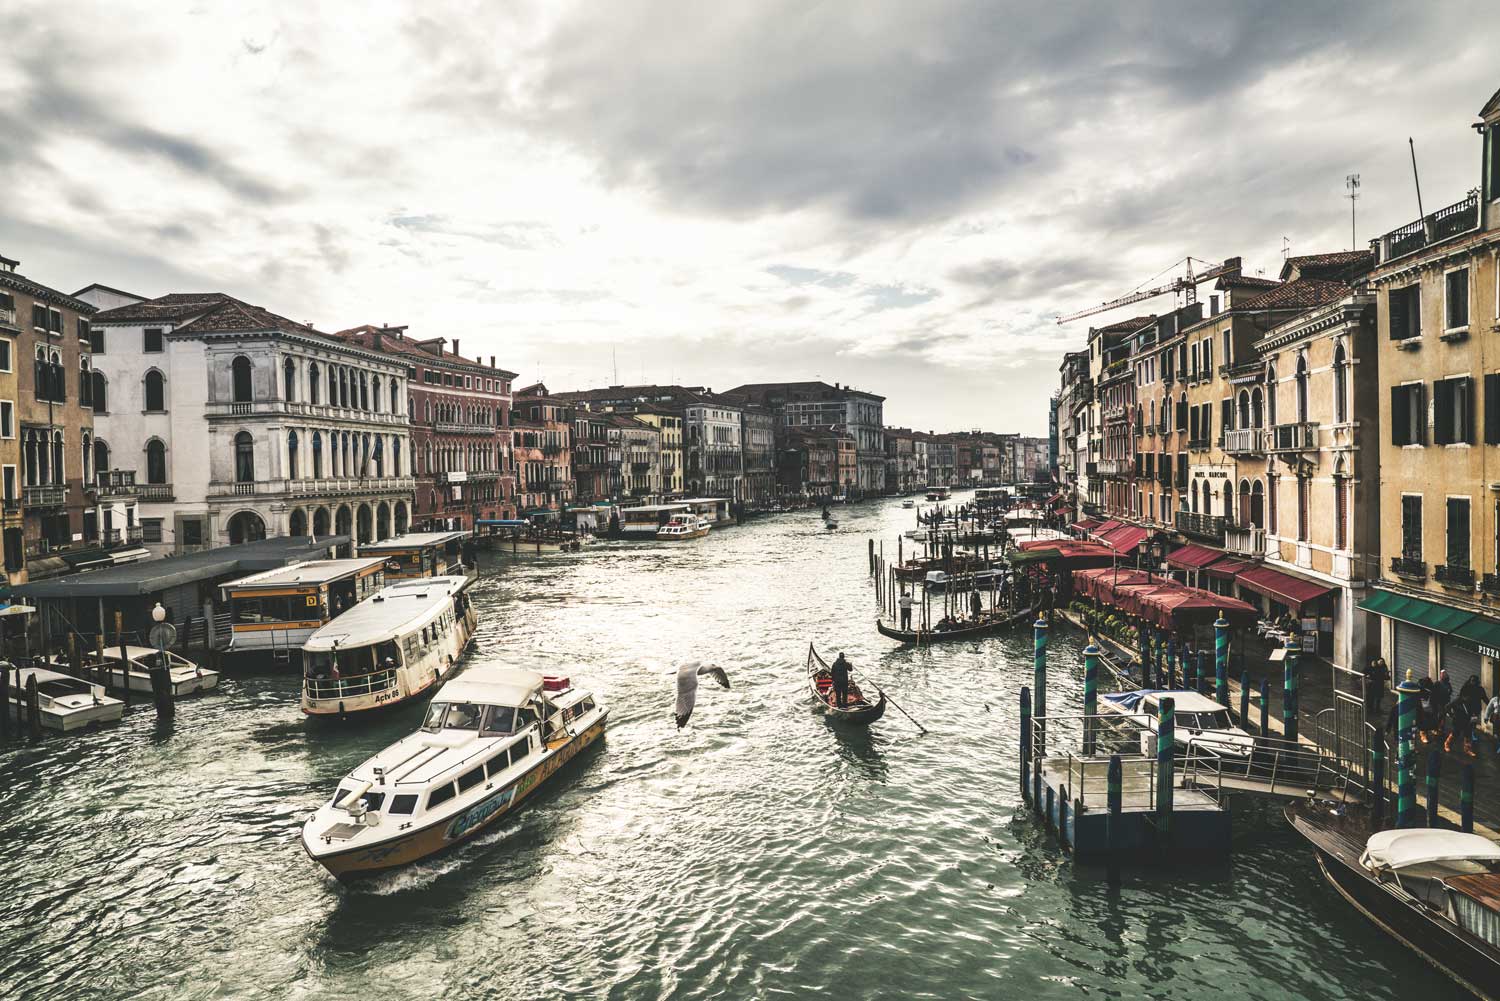 Venice in winter, solace away from home (©Revolution)